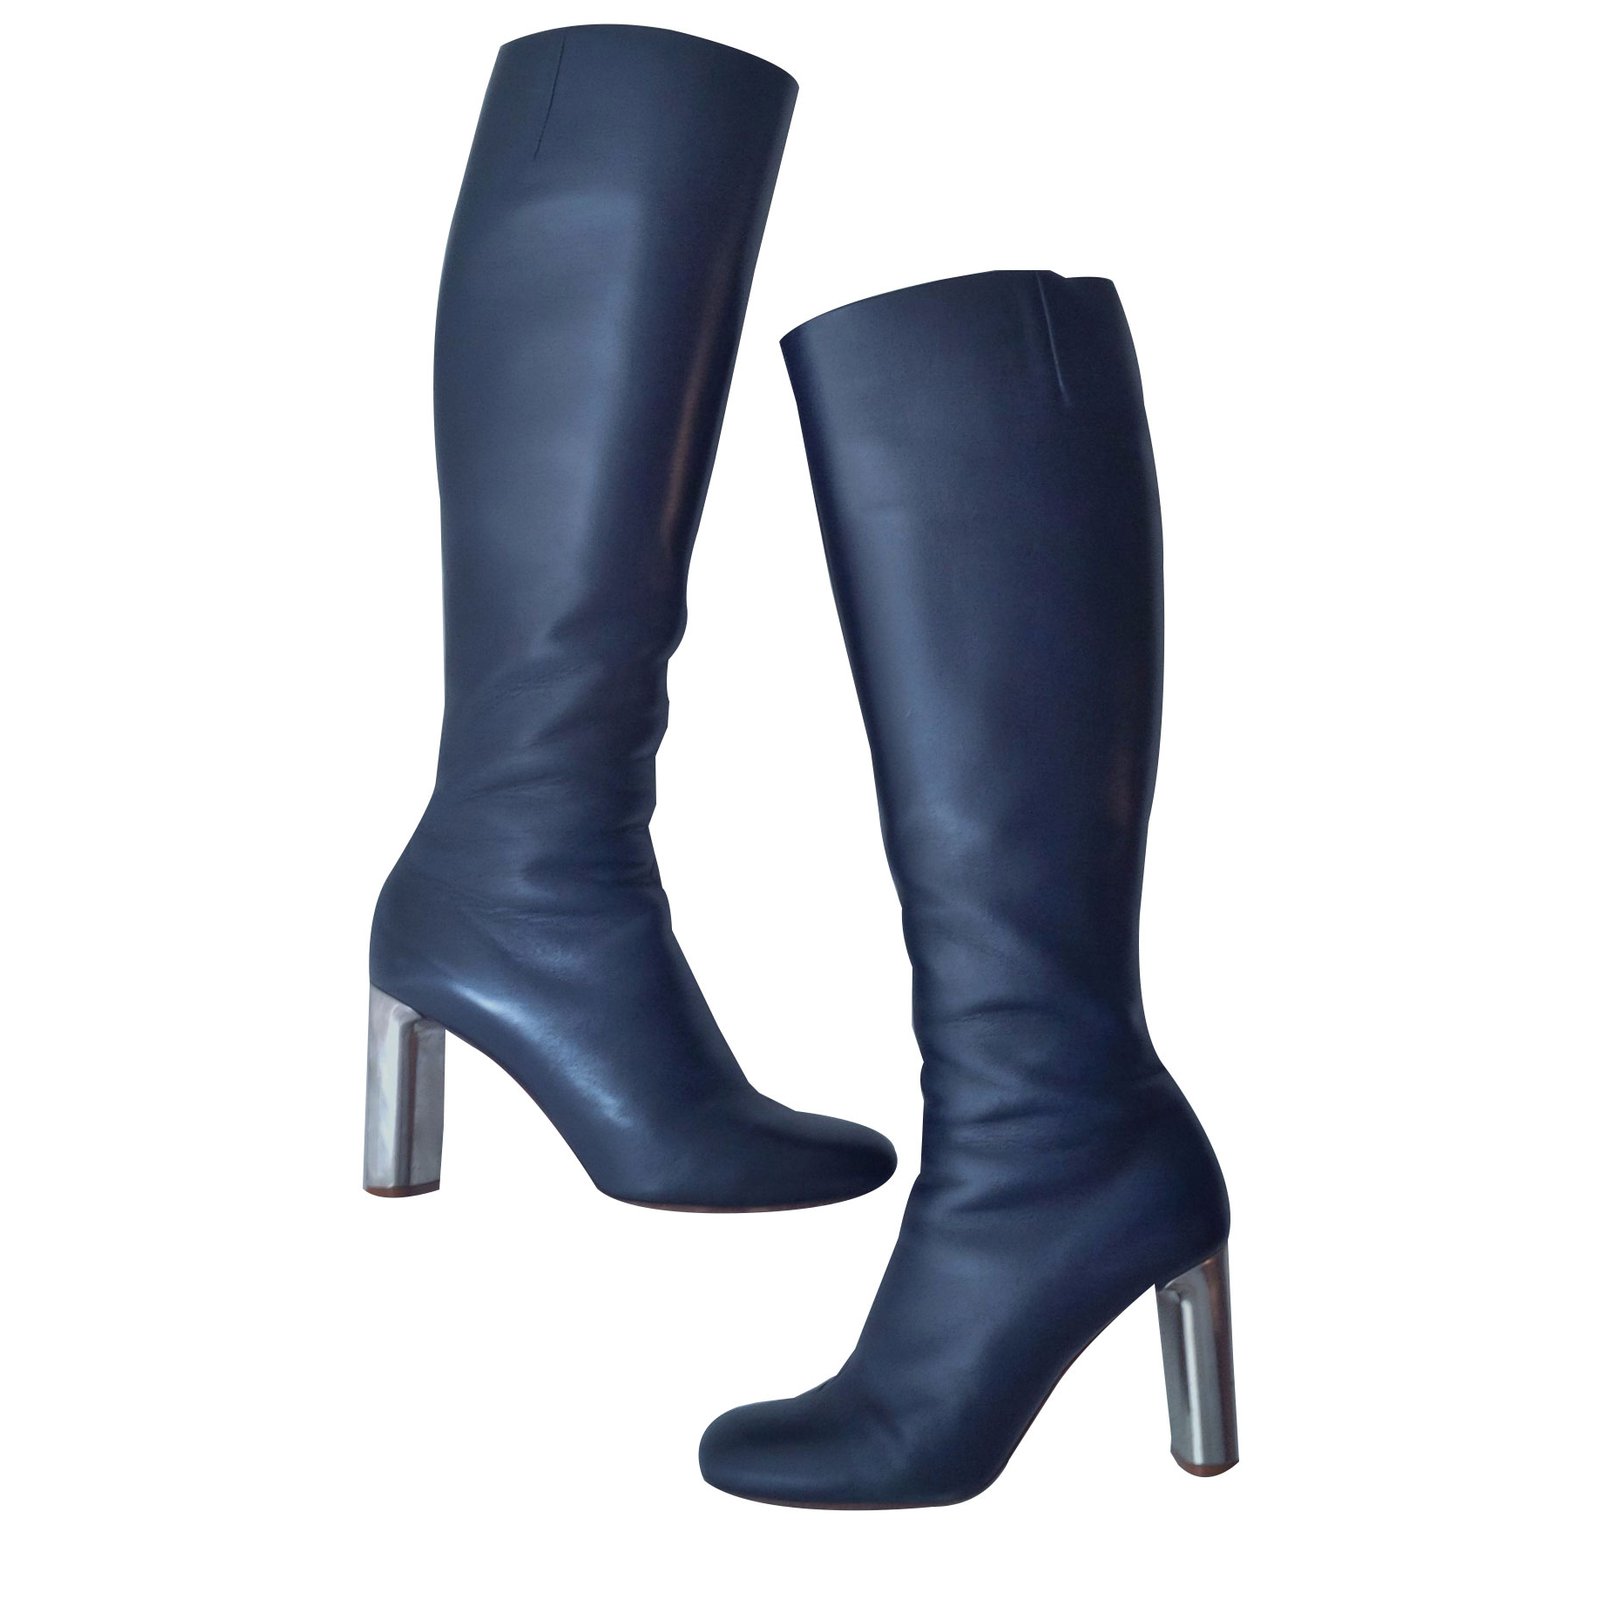 navy leather knee high boots